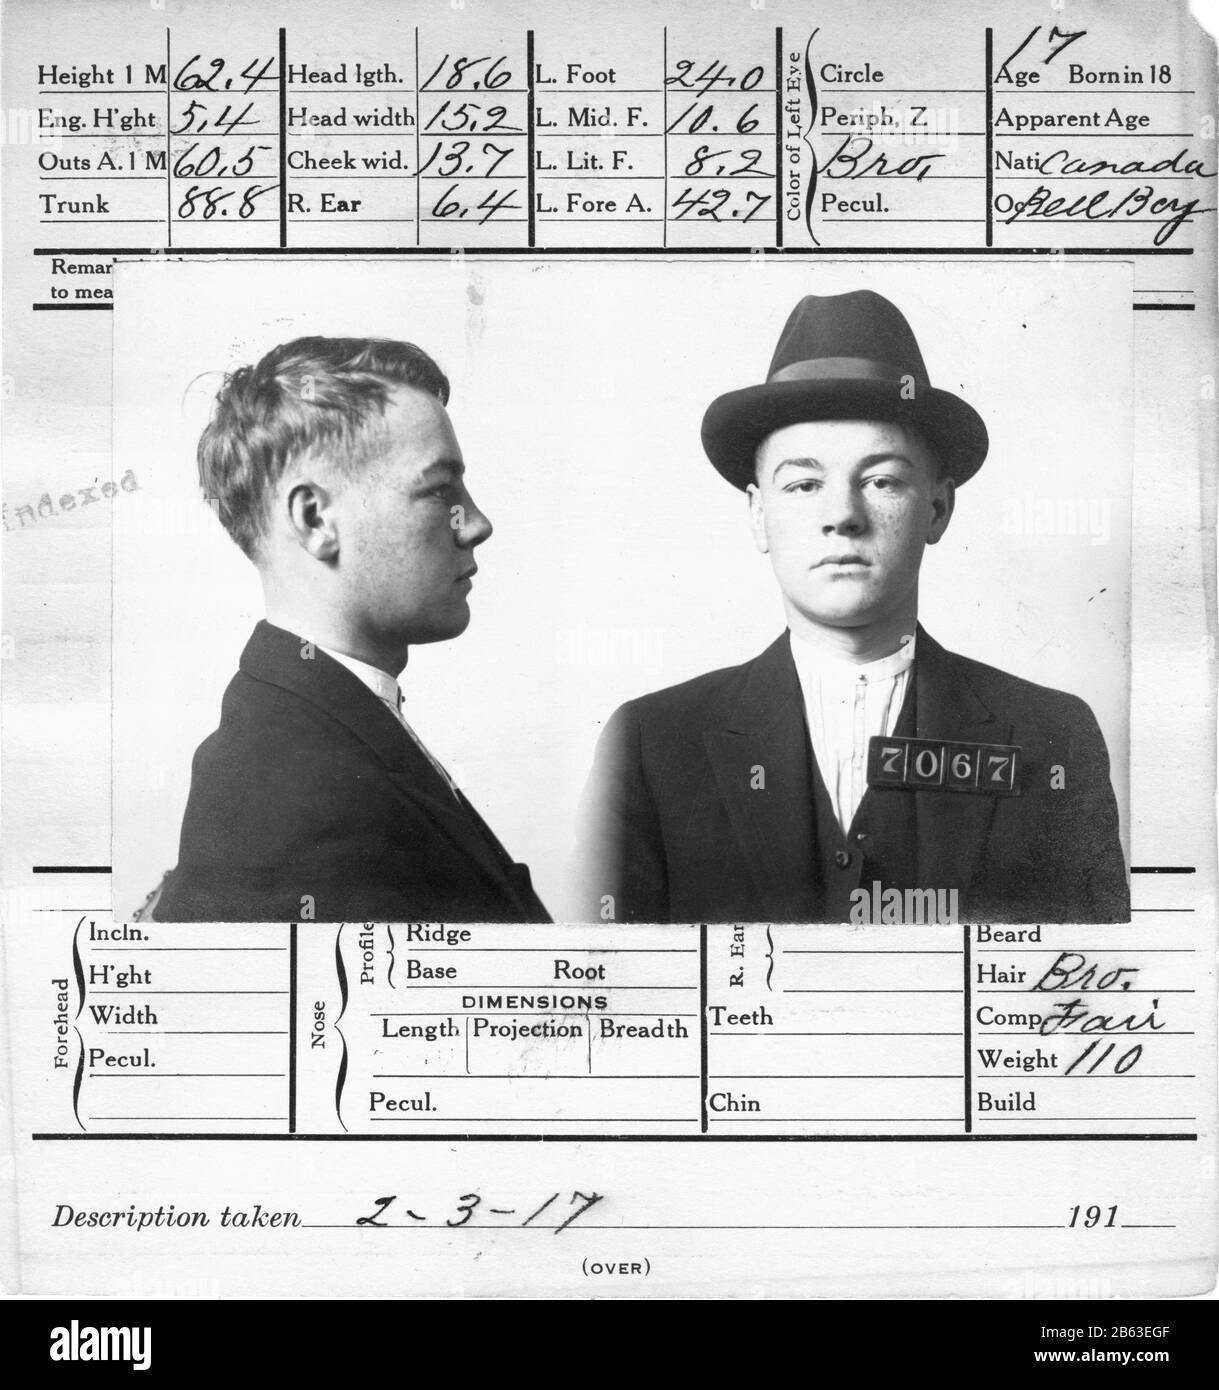 Edwardian era mugshot of 17-year-old criminal in San Franciso, California. Front and side headshots of this man. At the time of his arrest, he was working as a Bell Boy. He was convicted of burglary. This official 5-1/2' x 6' card was filled out on February 3, 1917. Look at the extensive amount of measurements they did on this man's head. This young man from Canada is wearing a hat. Look at the extensive amount of measurements they did on his head. More info about the man is on the back of this 5-1/2' x 6' card.  To see my other vintage images, Search:  Prestor  vintage  odd Stock Photo